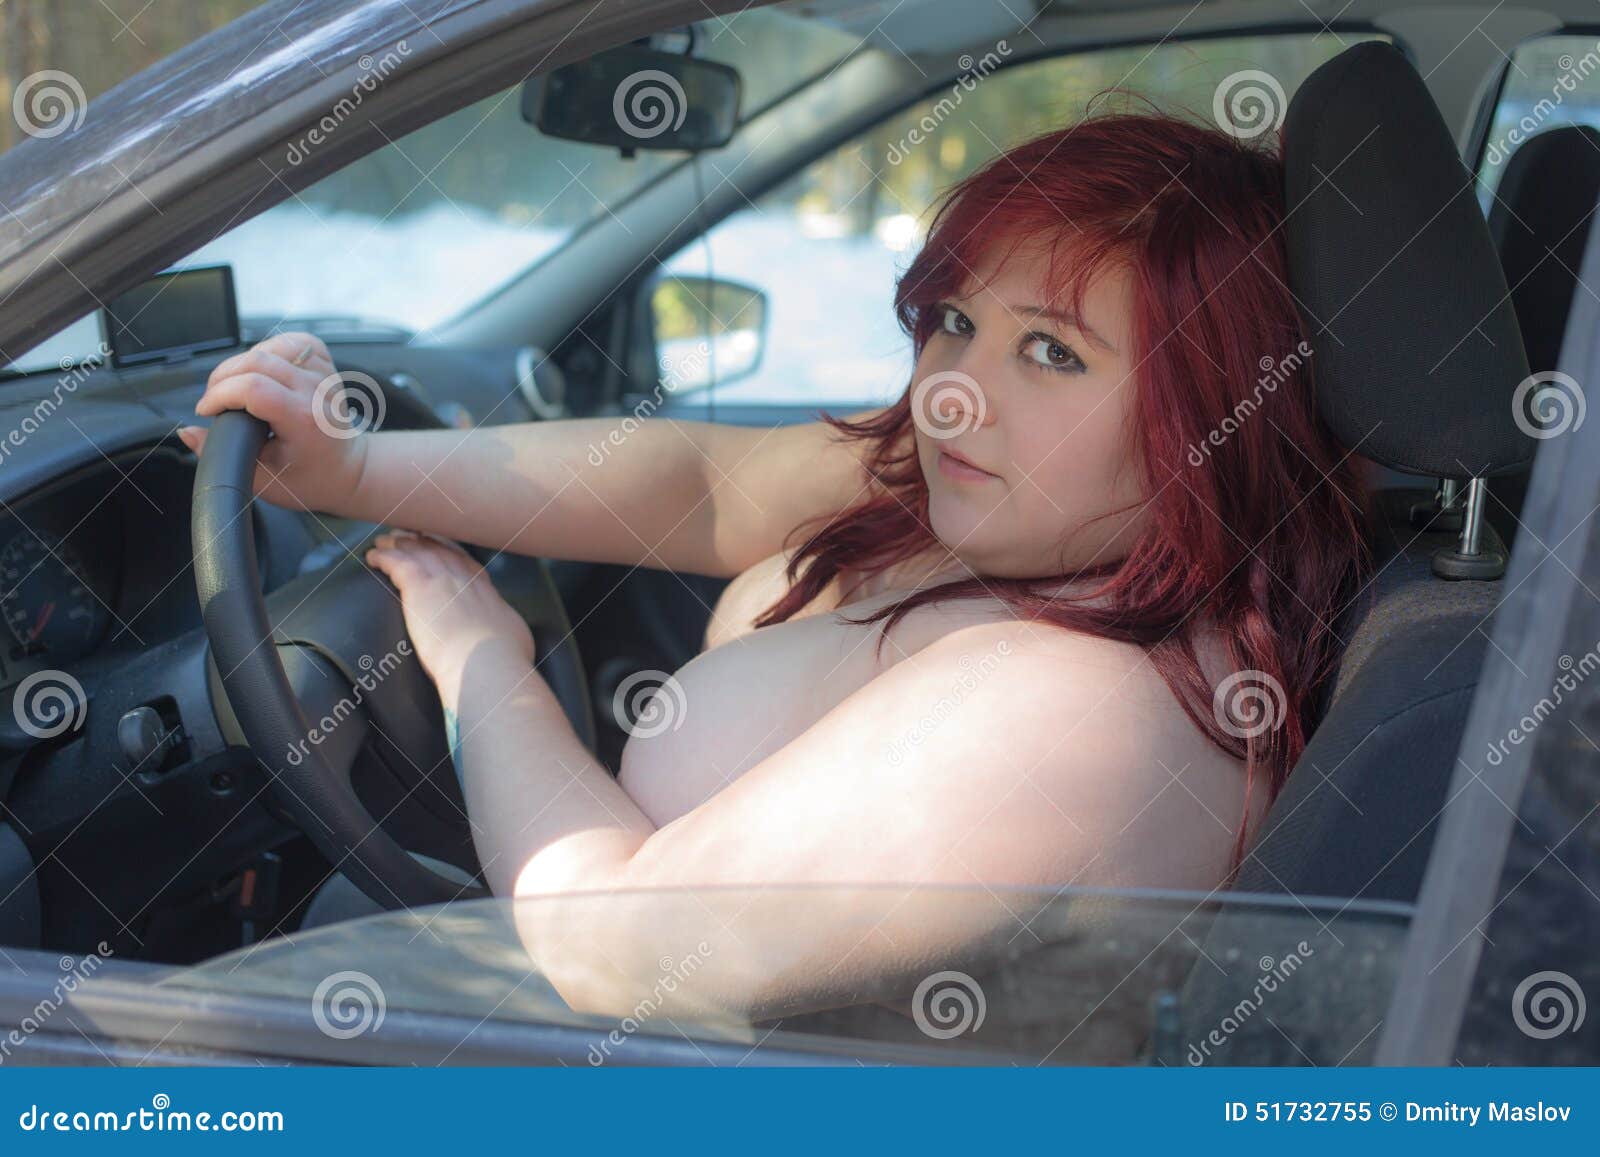 Driving Nude